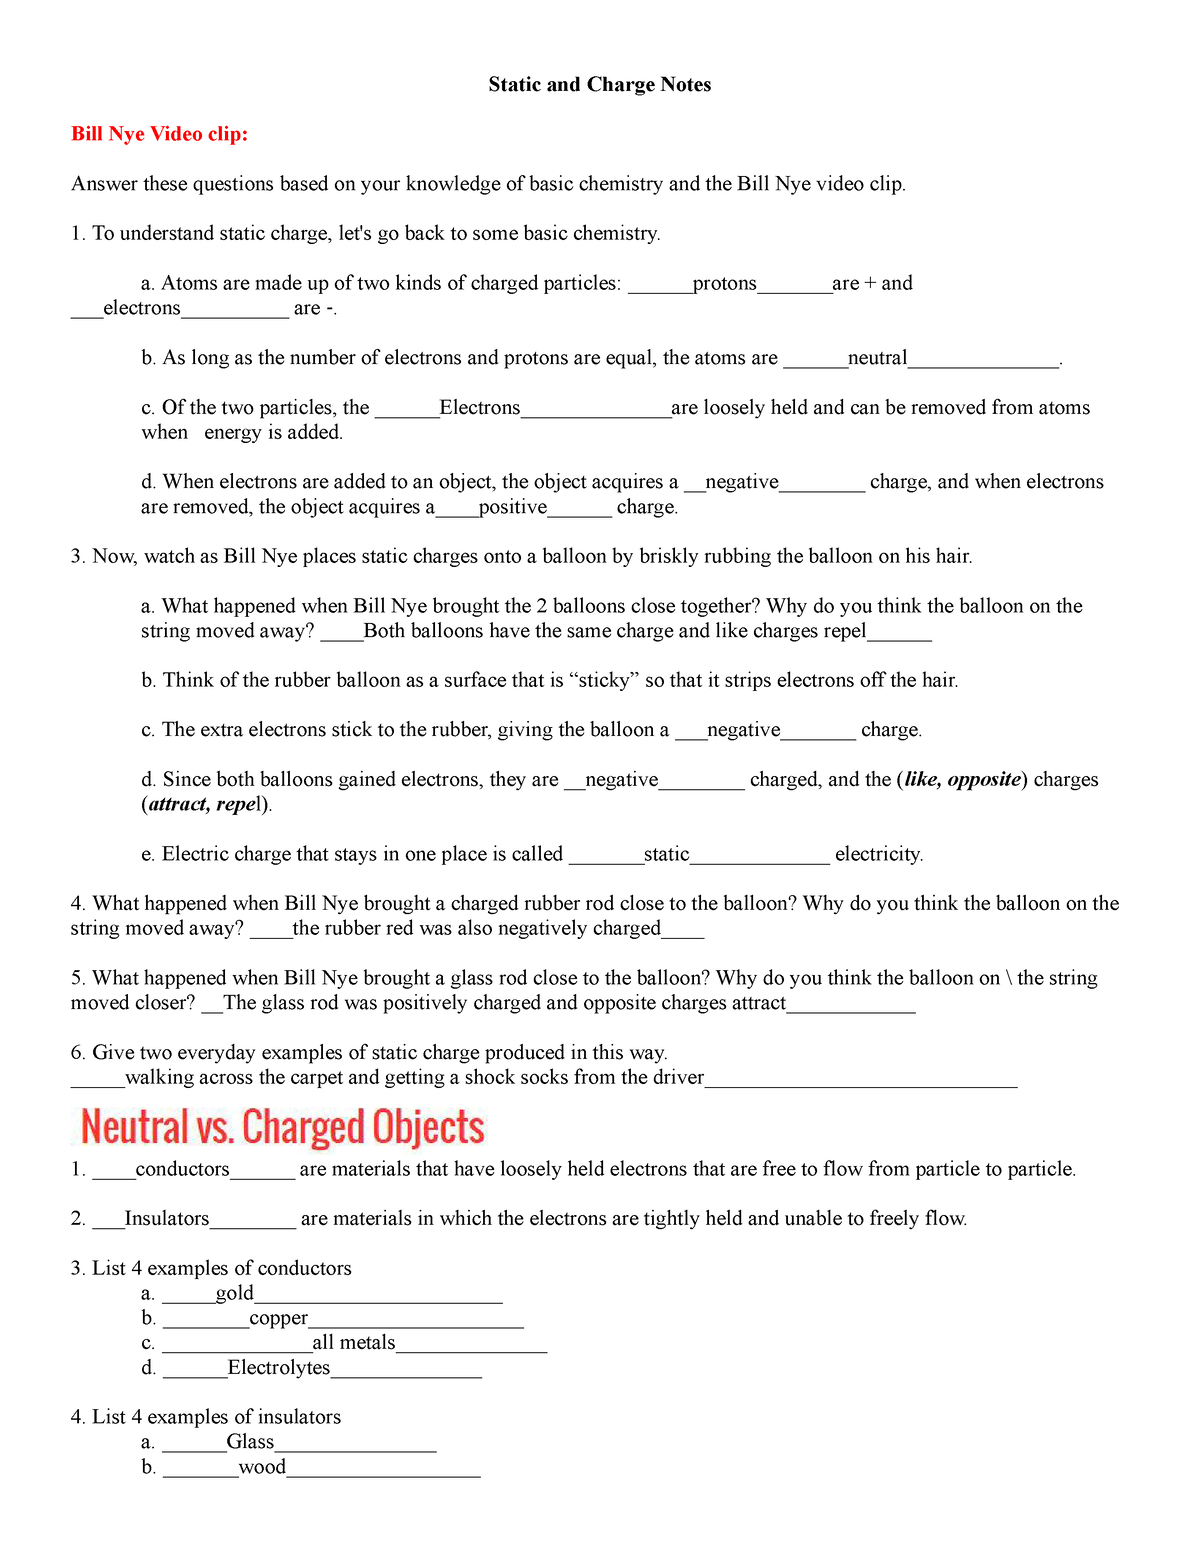 Copy of The Nature of Charge Static and Charge Notes - Static and In Bill Nye Static Electricity Worksheet